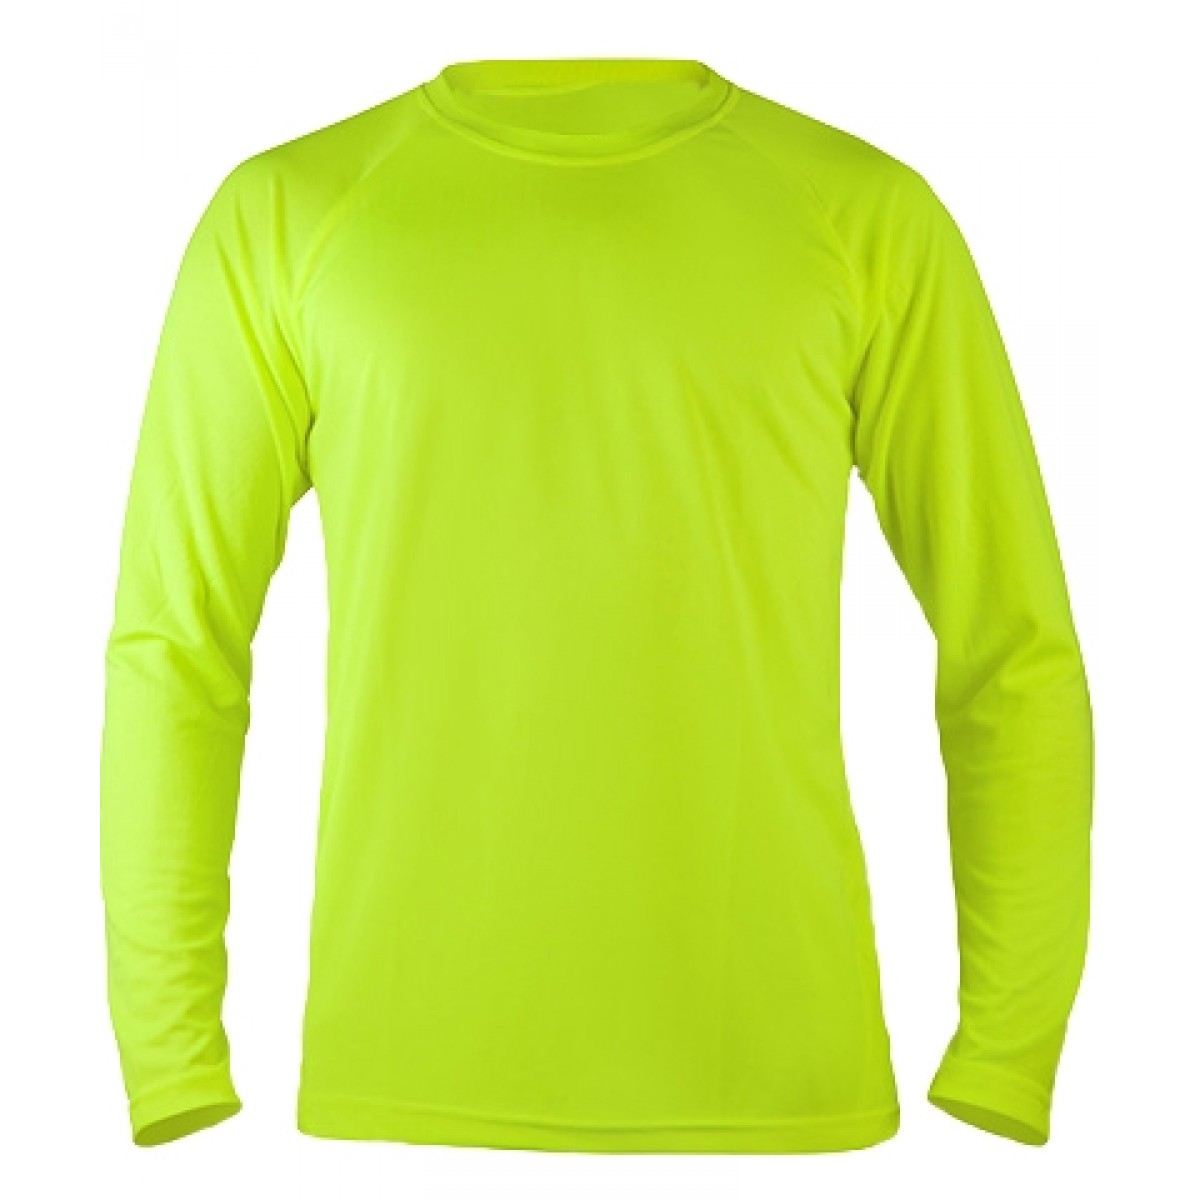 Long Sleeve Performance Tee / Safety Green-Safety Green-YM